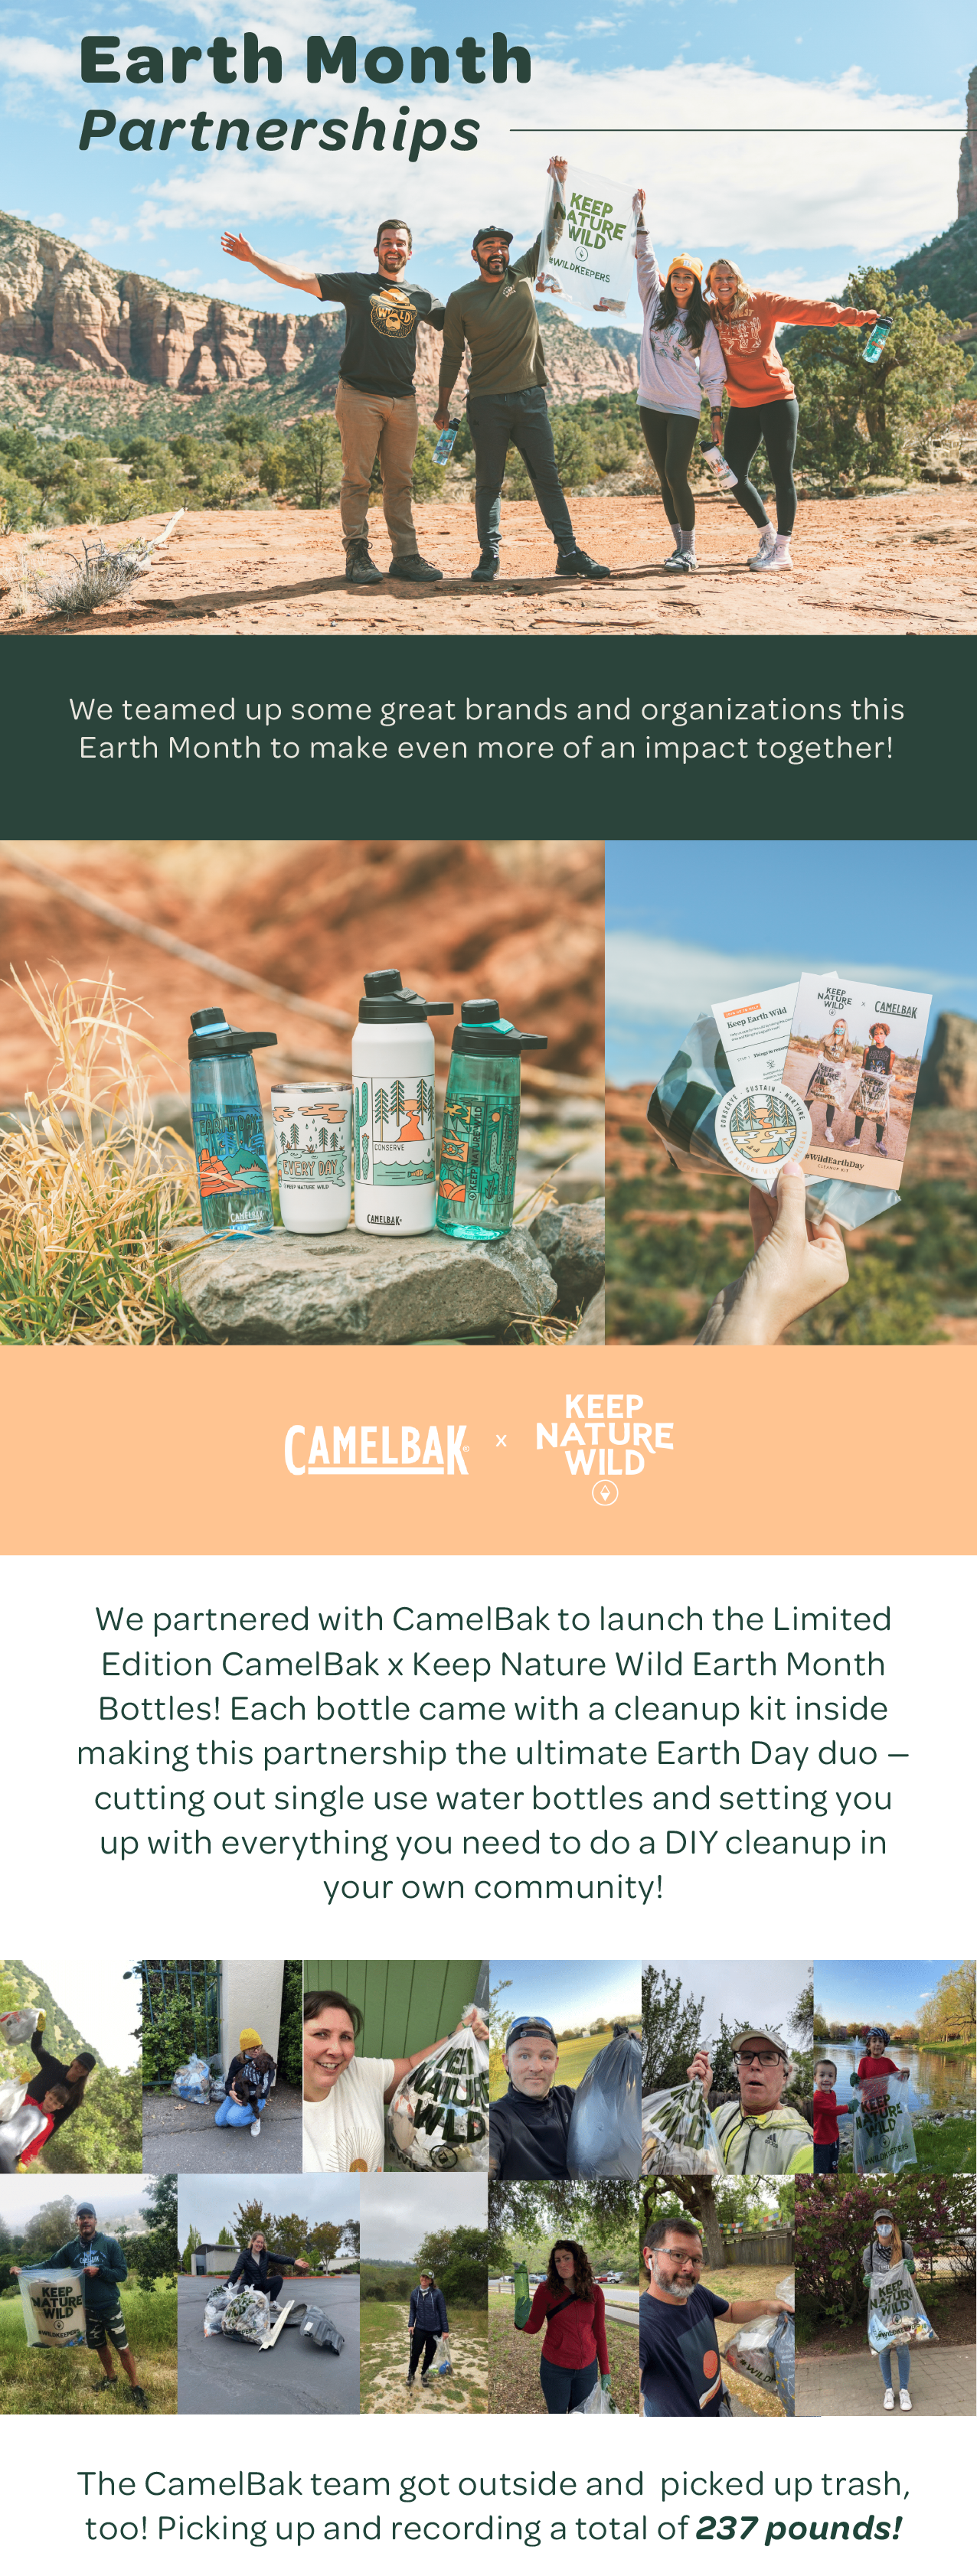 Earth Month Partnerships — We teamed up some great brands and organizations this Earth Month to make even more of an impact together! CamelBak x Keep Nature Wild. We partnered with CamelBak to launch the Limited Edition CamelBak x Keep Nature Wild Earth Month Bottles! Each bottle came with a cleanup kit inside making this partnership the ultimate Earth Day duo — cutting out single use water bottles and setting you up with everything you need to do a DIY cleanup in your own community! The CamelBak team got outside and  picked up trash, too! Picking up and recording a total of 237 pounds!